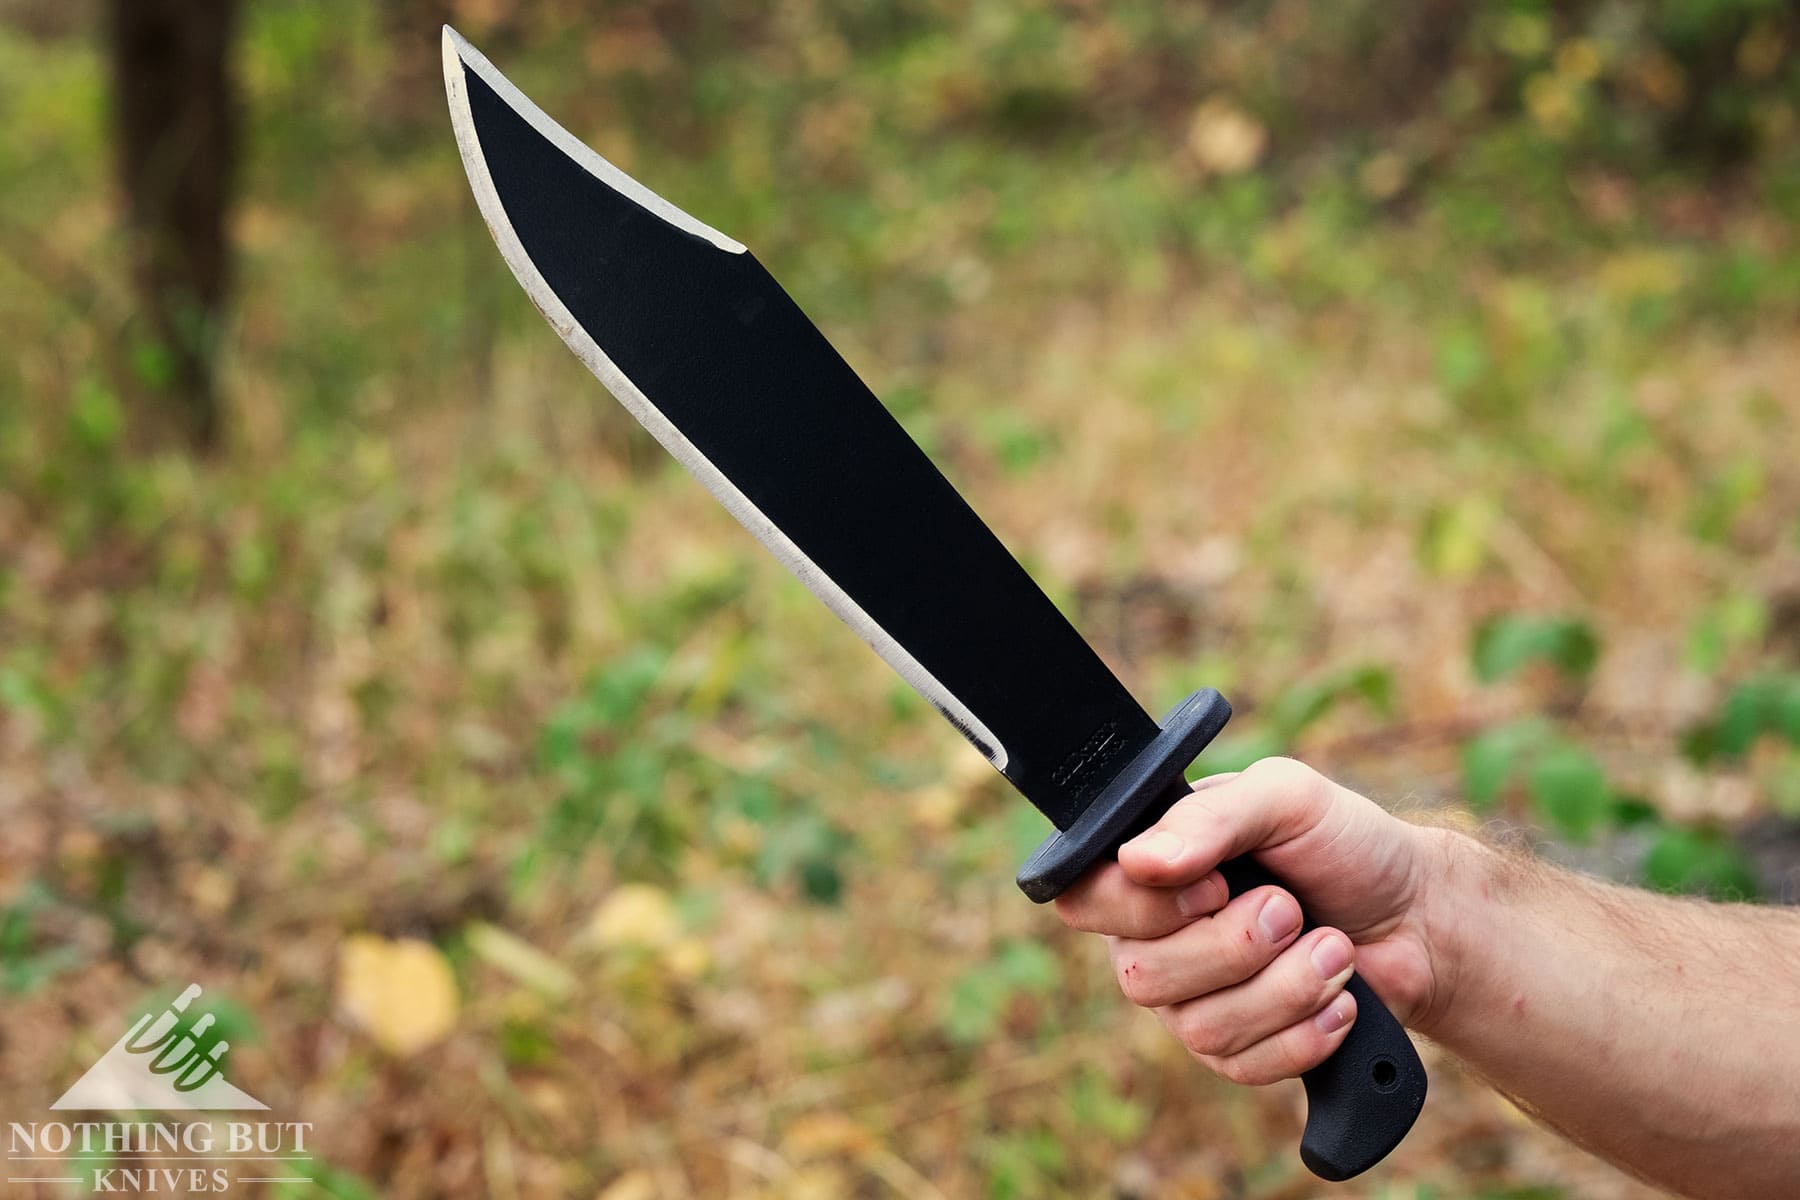 The Black Bear Bowie being held in a hammer grip.